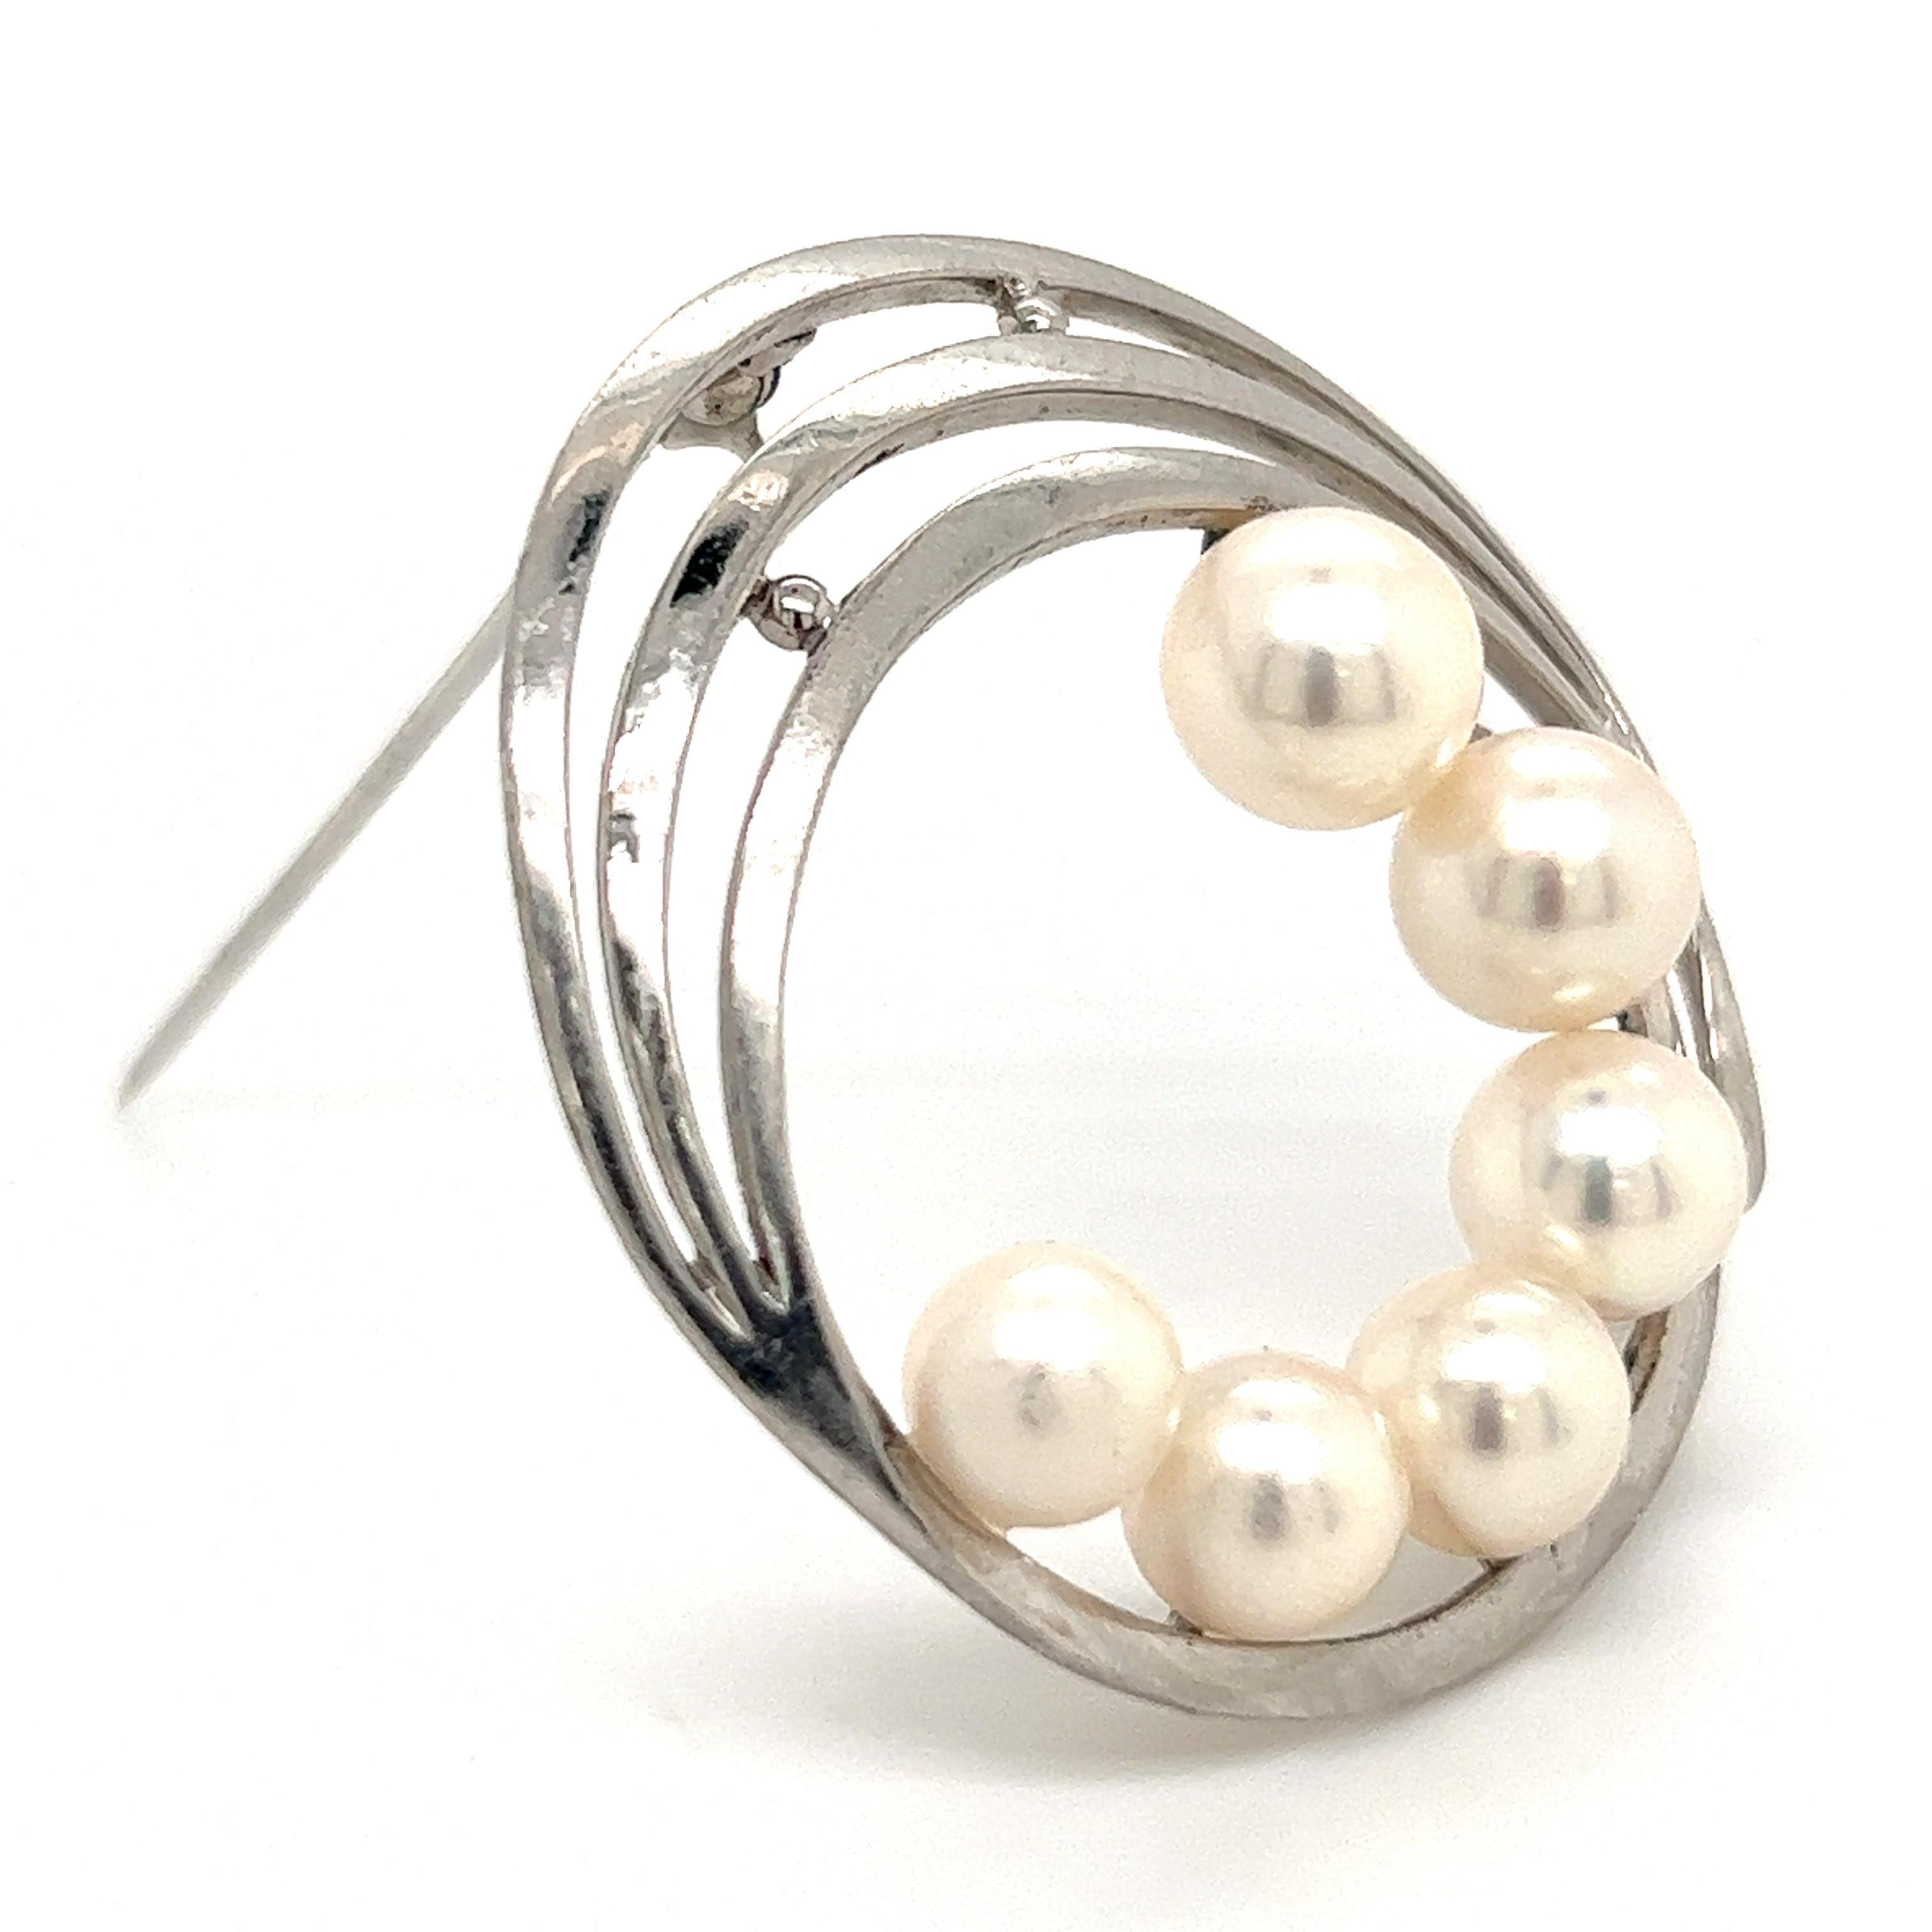 Mikimoto Estate Akoya Pearl Circle Brooch Sterling Silver 7.5 mm M264

This elegant Authentic Mikimoto Silver brooch has 6 Saltwater Akoya Cultured Pearls ranging in size from 6-7.5 mm with a weight of 6.84 Grams.

TRUSTED SELLER SINCE 2002

PLEASE